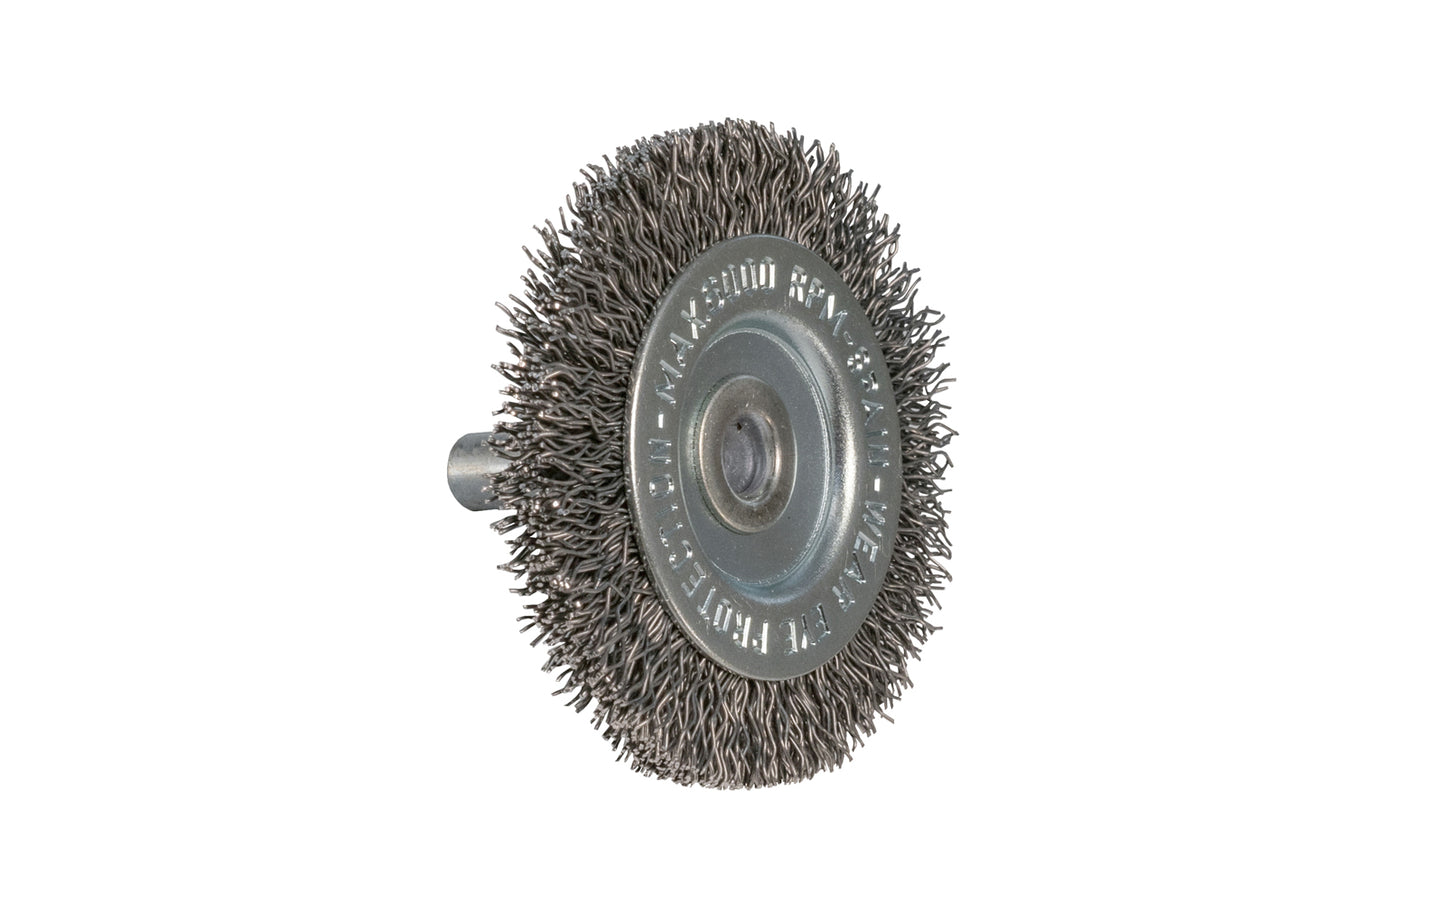 Alfa Tools 2" Coarse Wire Wheel - 1/4" Shank. 0.012" Wire Diameter. 6000 RPM max. All-steel construction. Applications include deburring, blending, removal of rust, scale, dirt, & finish preparation prior to painting or plating.  Made by Alfa Tools.   